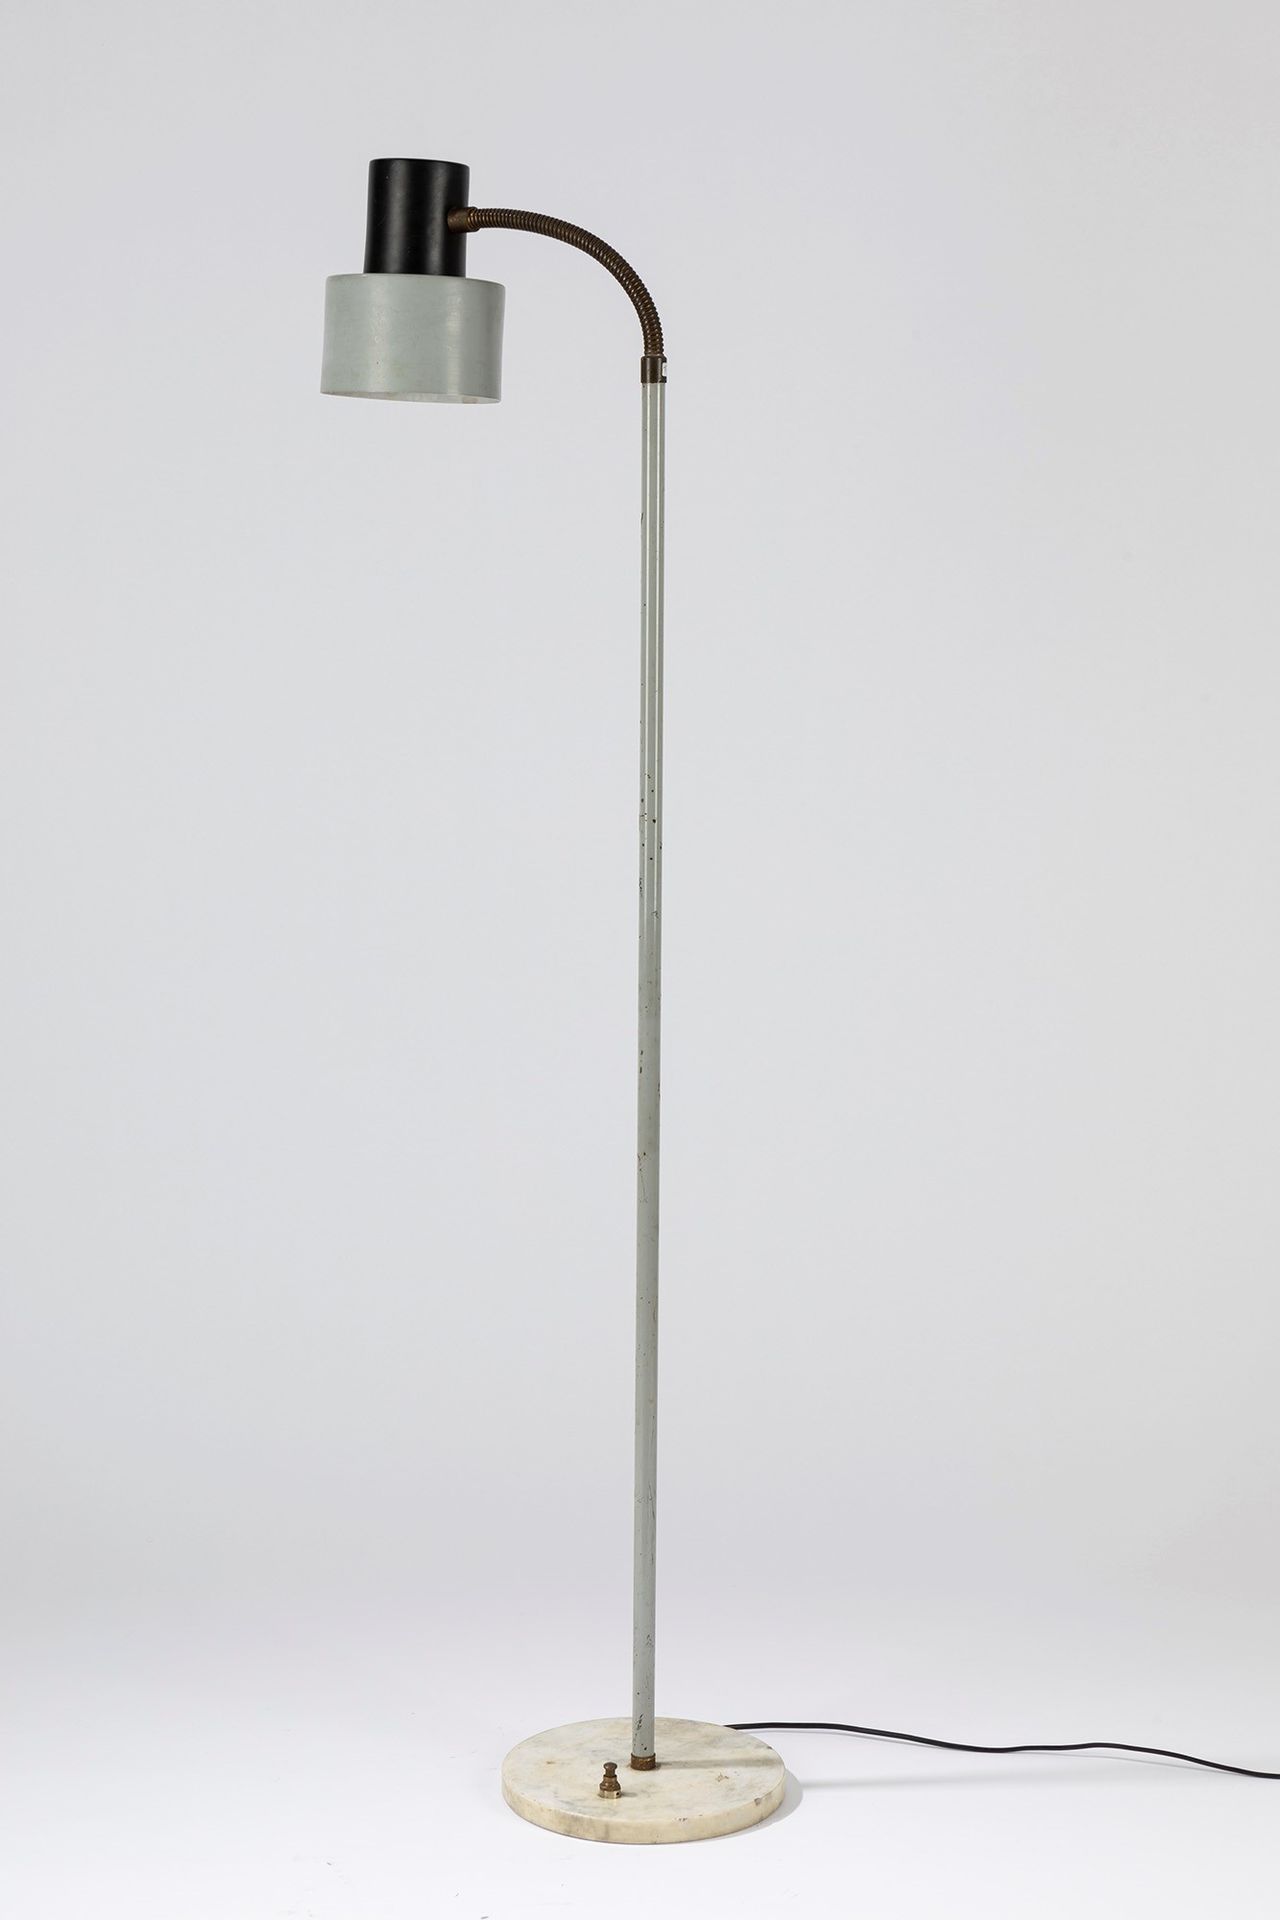 ITALIAN MANUFACTURE Floor lamp, 1960 ca.

Cm h 130 x 32
in lacquer metal, marble&hellip;